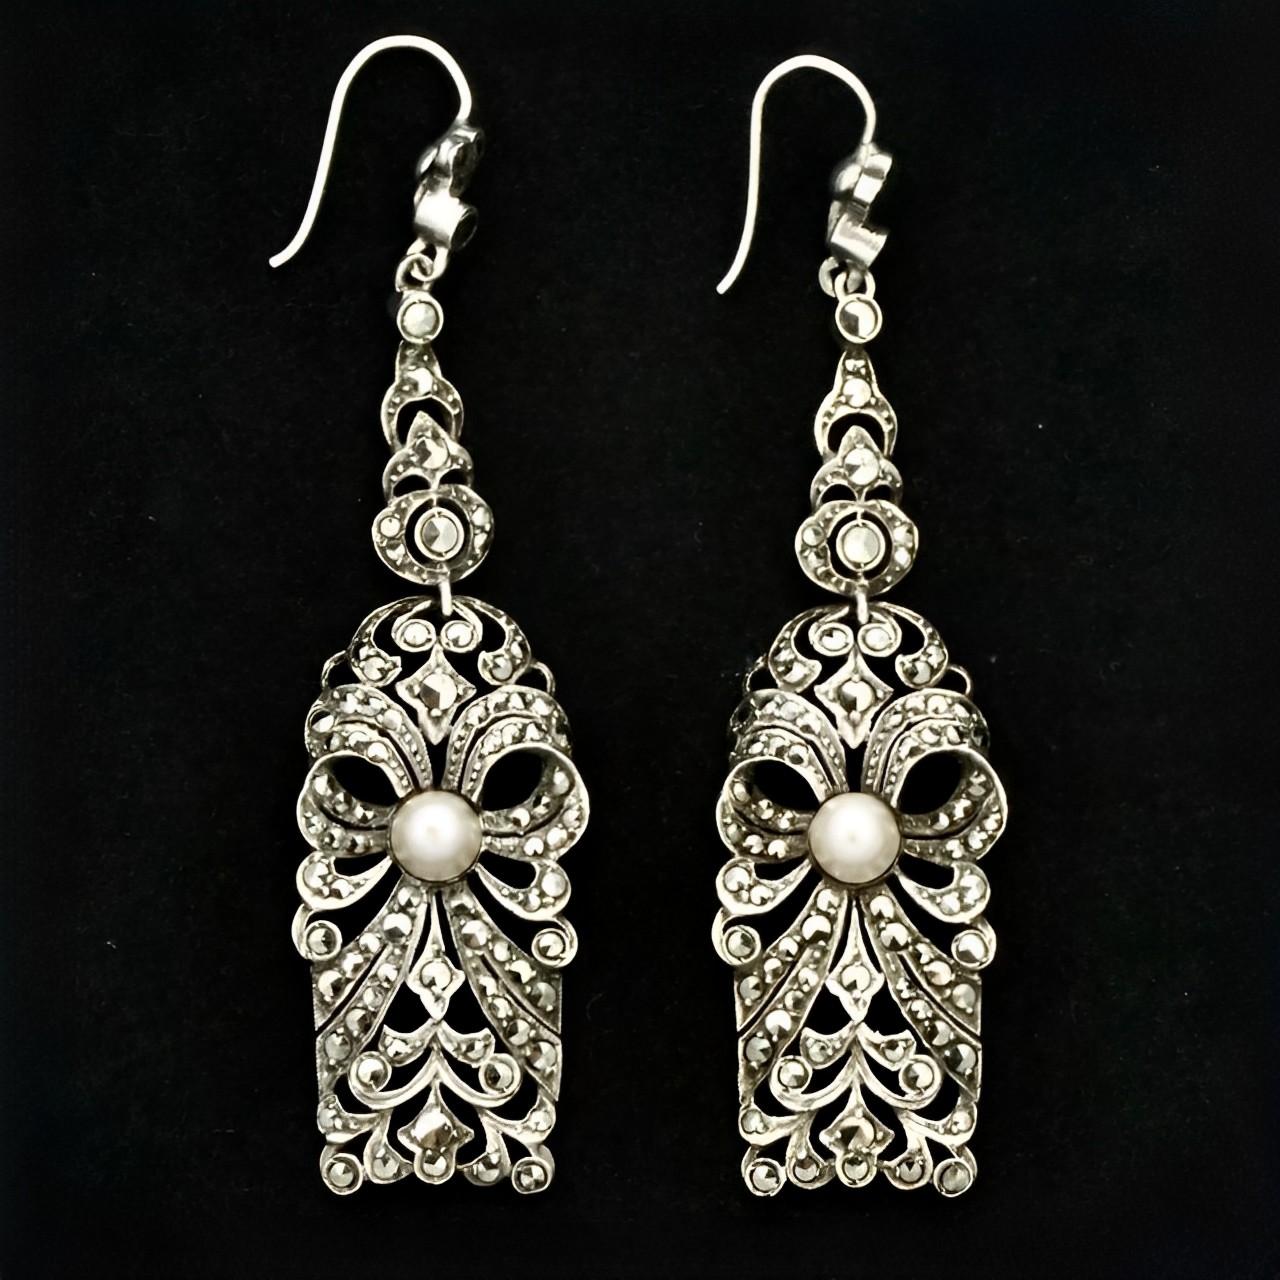 Art Deco Silver and Marcasite Earrings set with Mabe Cultured Pearls circa 1920s For Sale 2